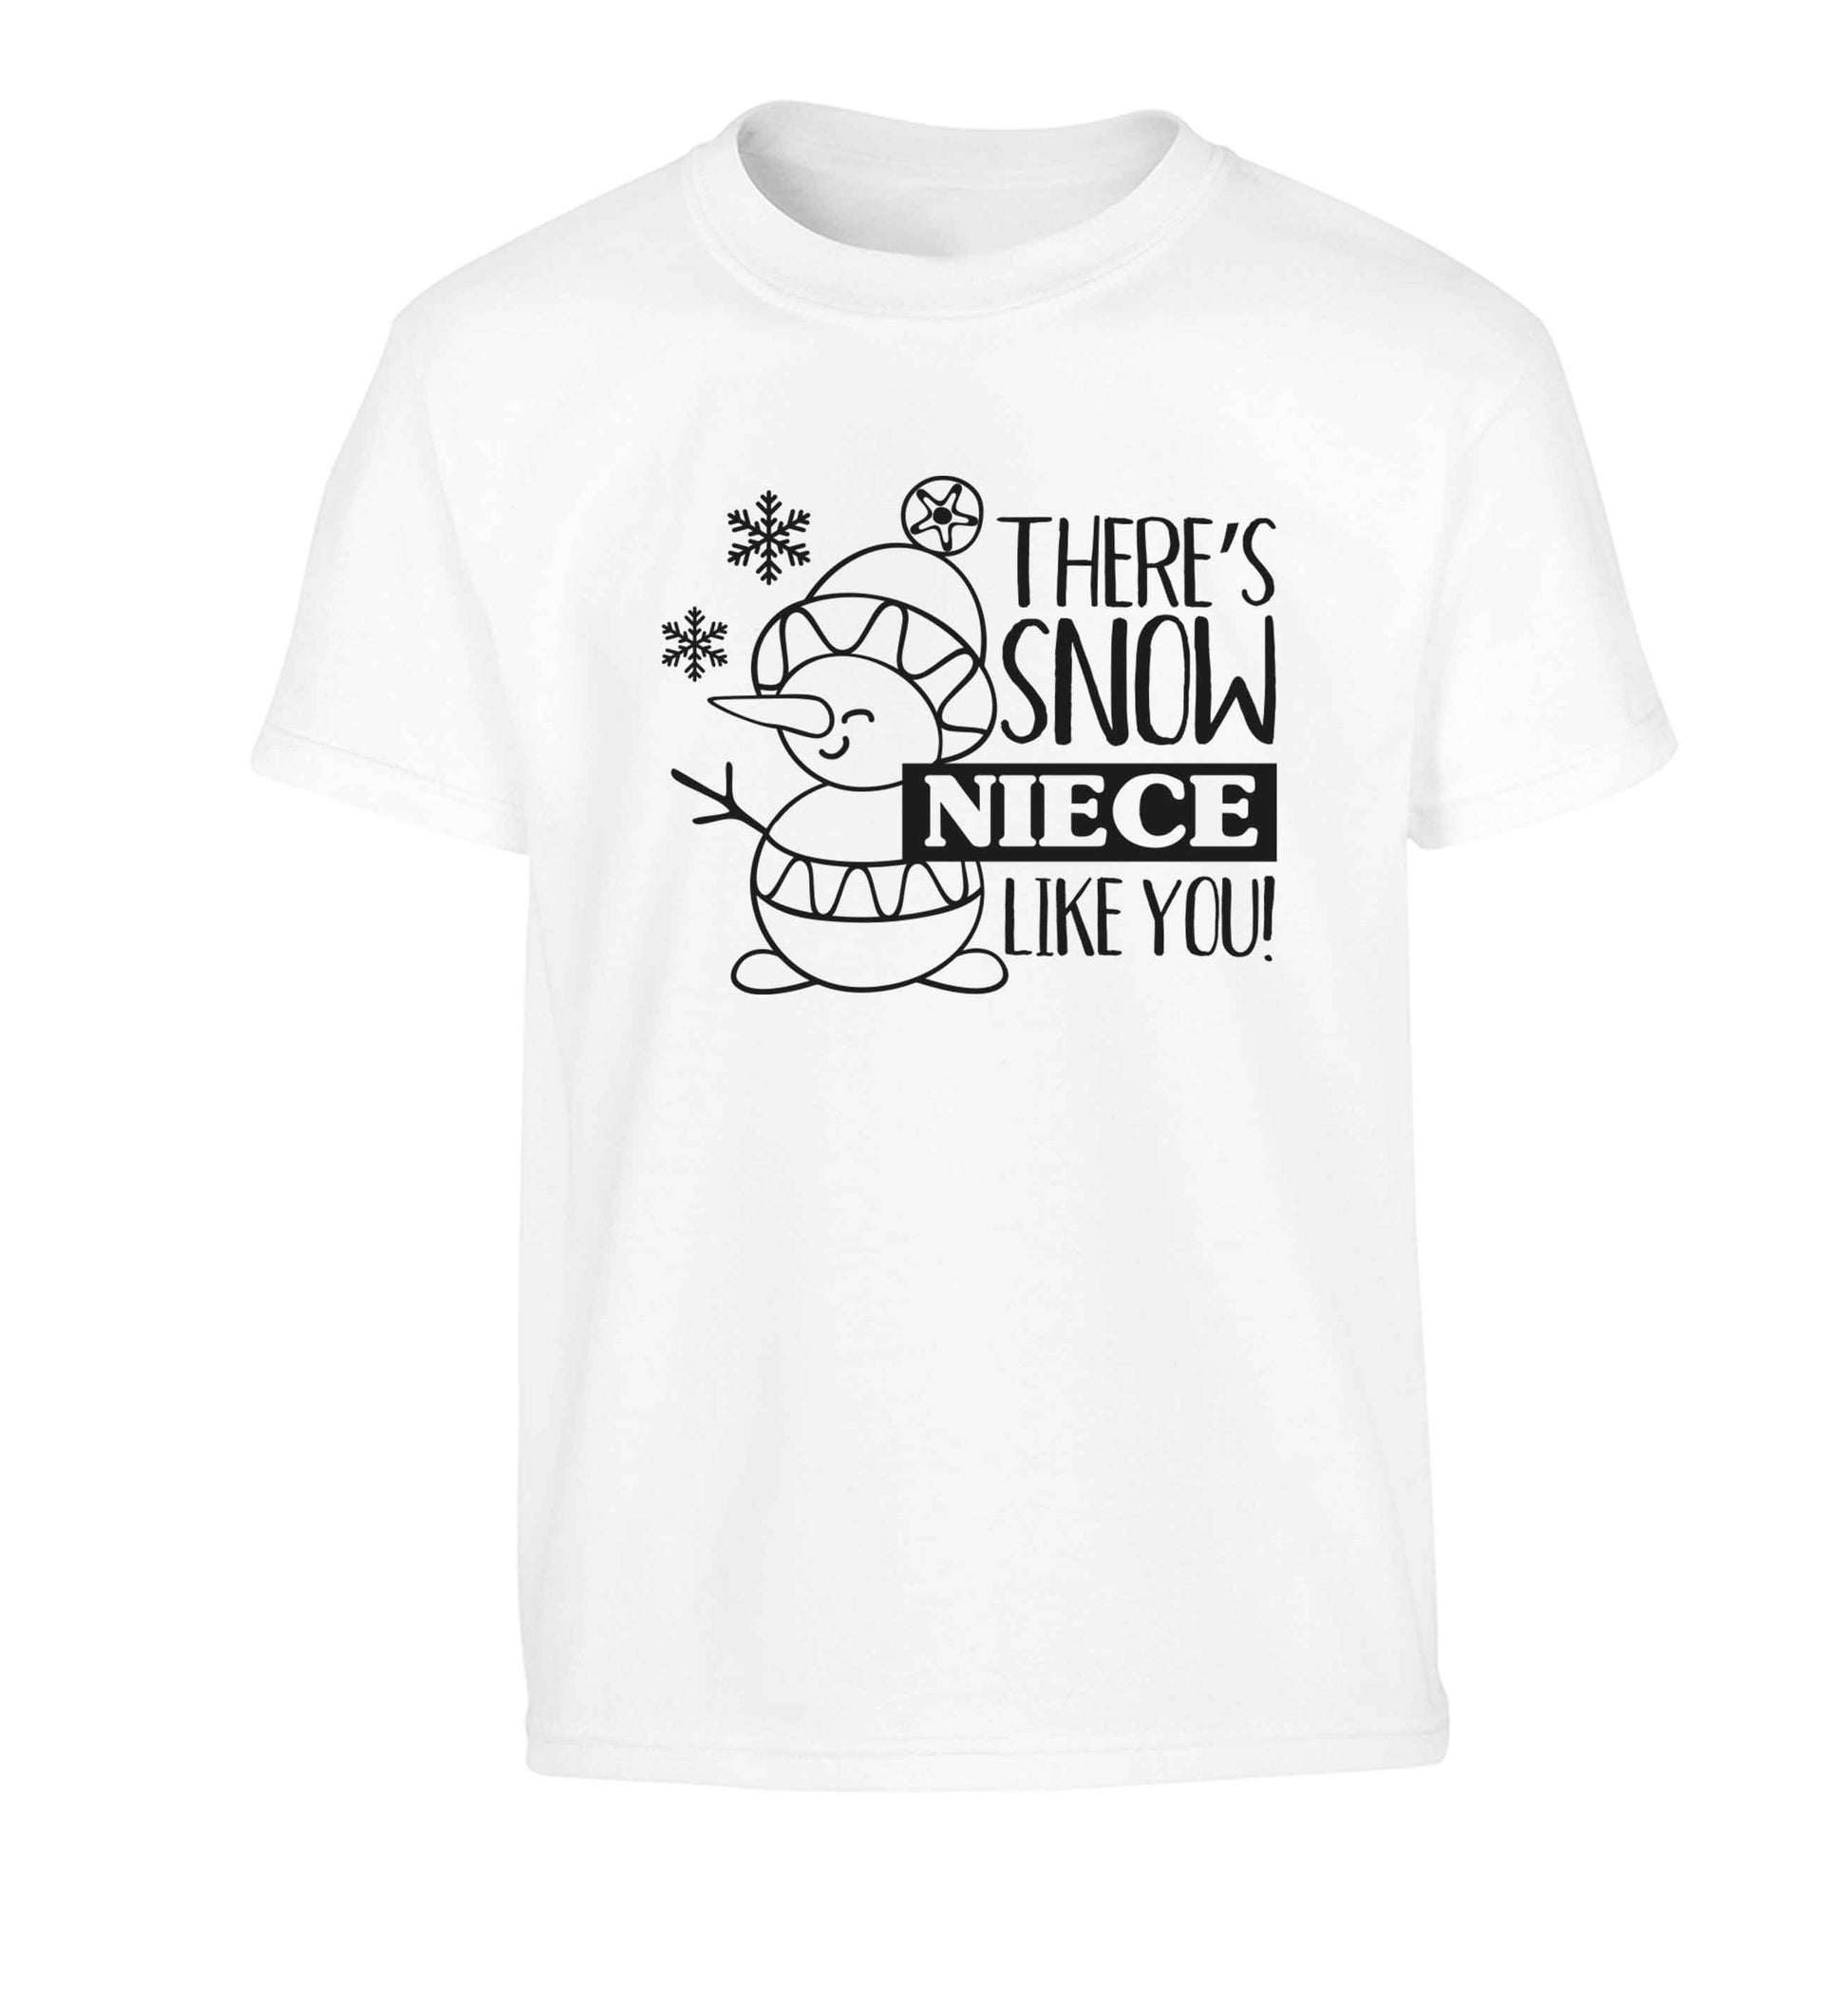 There's snow niece like you Children's white Tshirt 12-13 Years